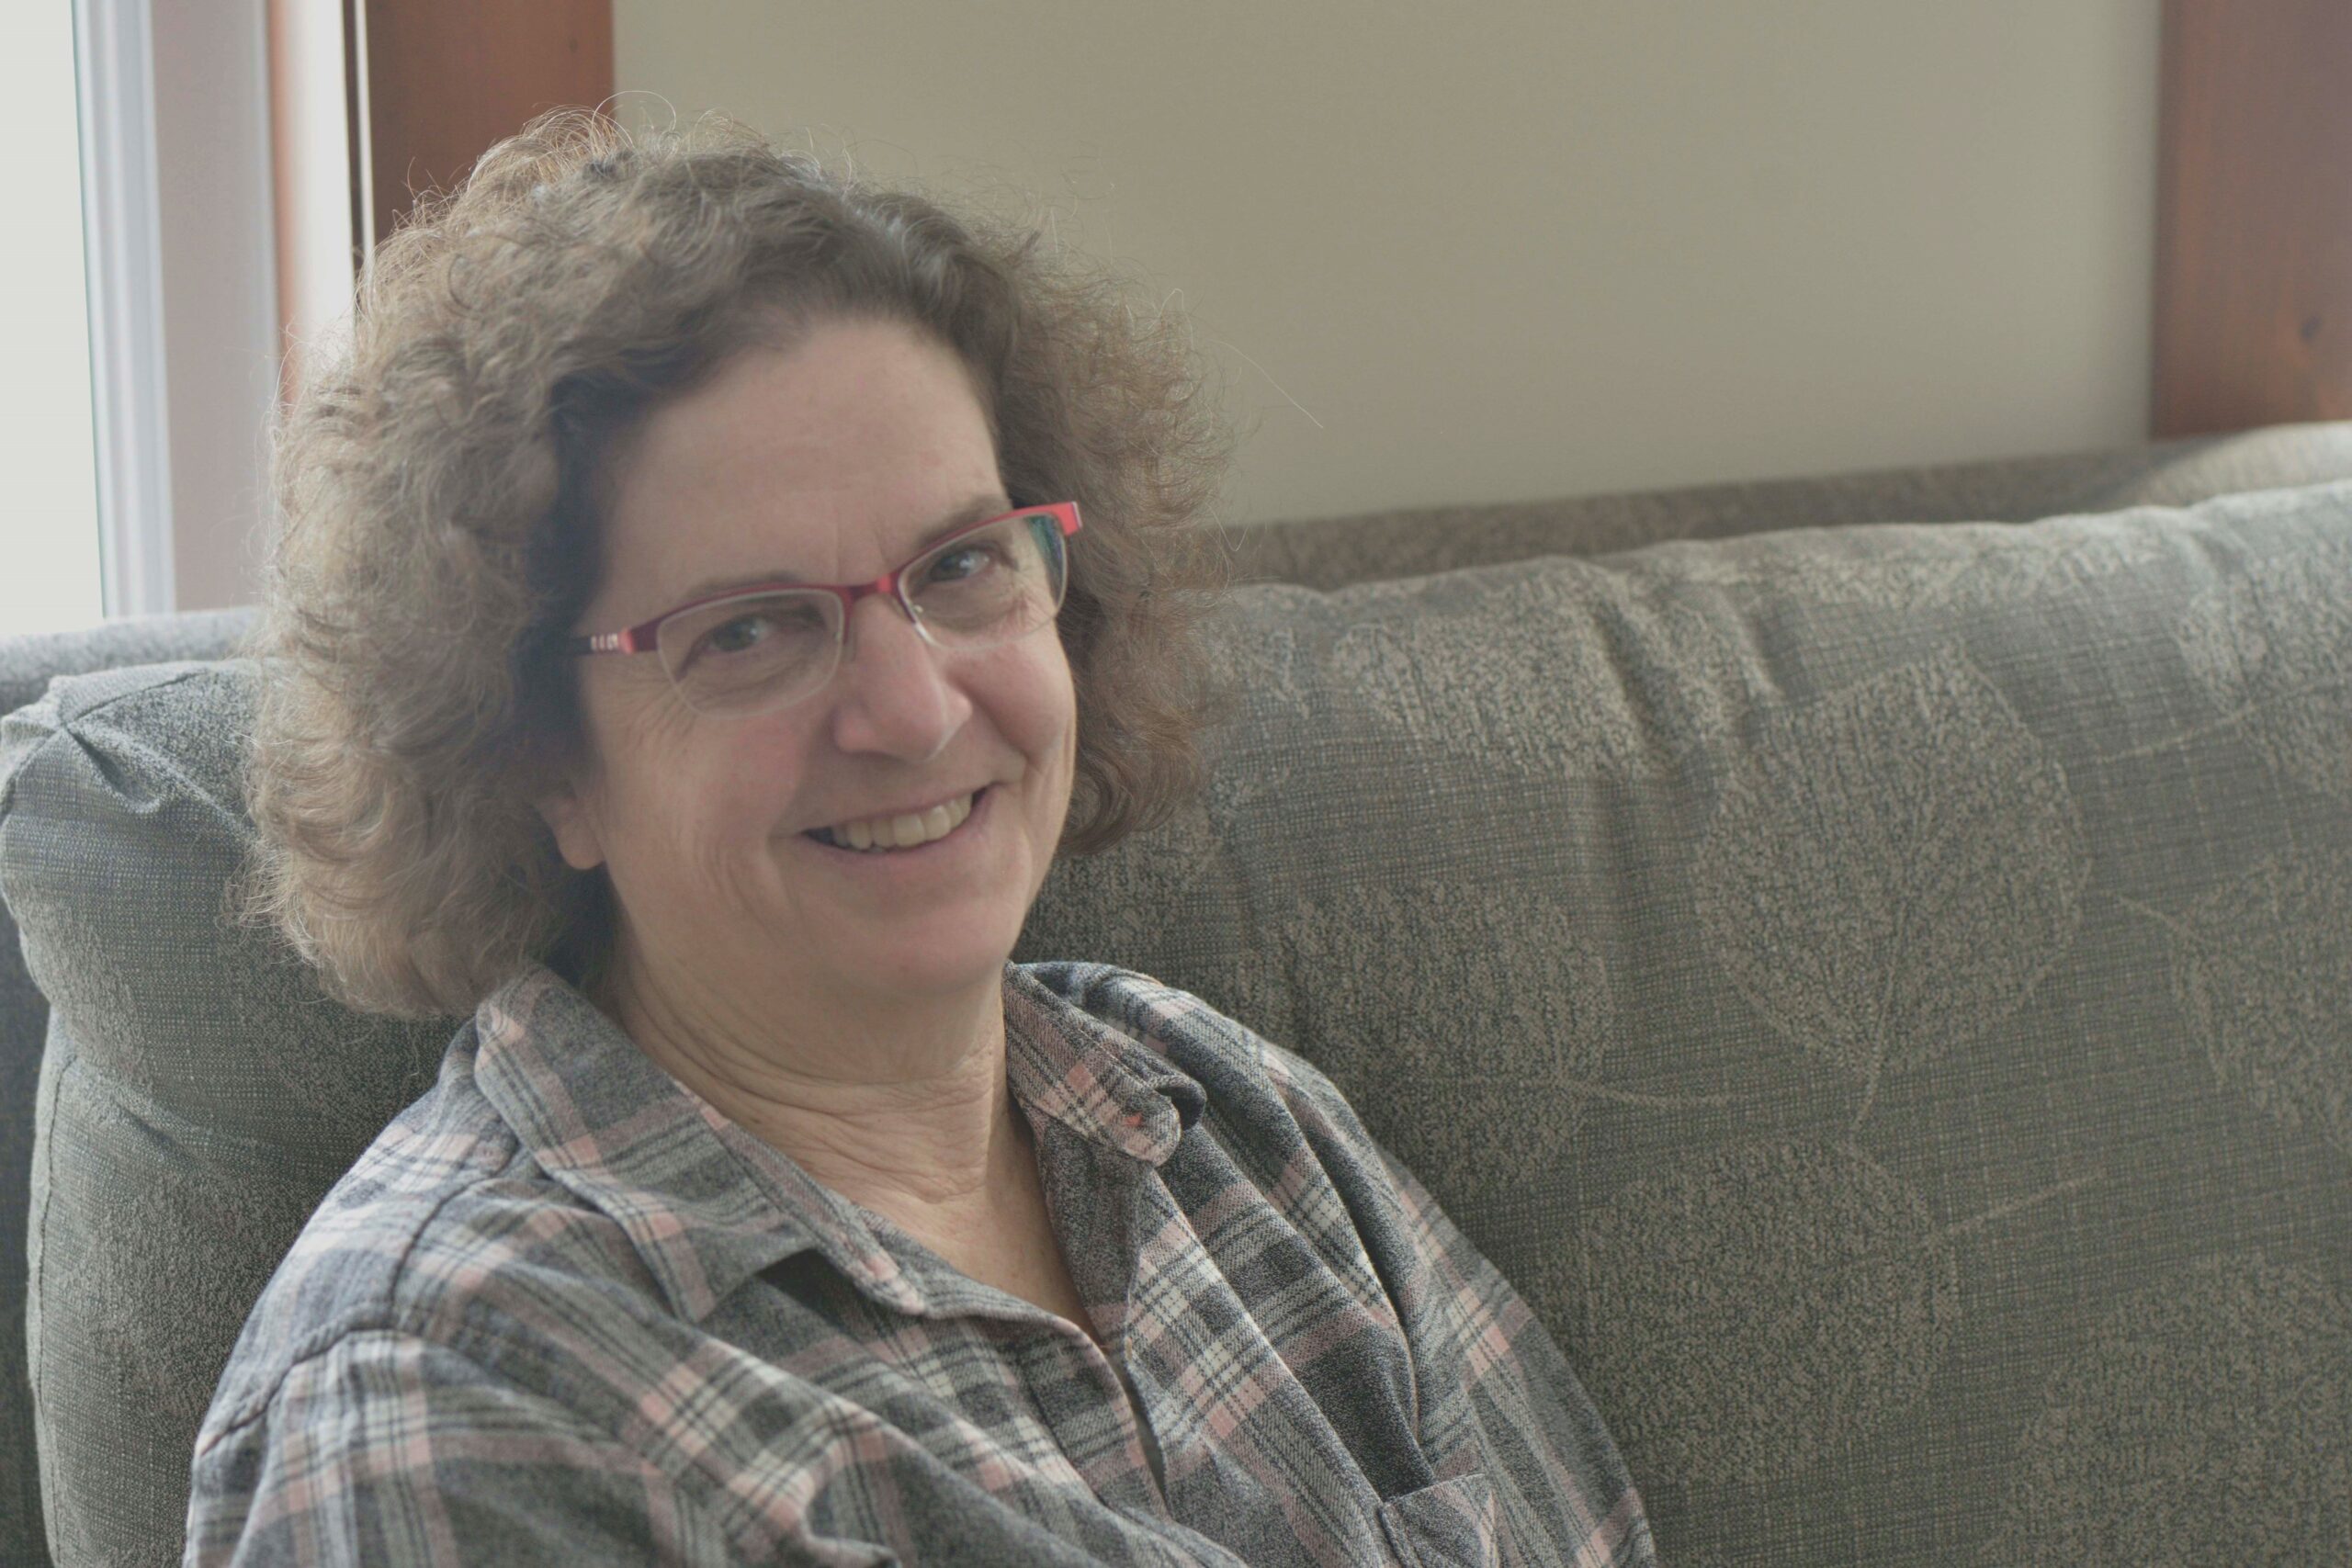 Anne Marie Todkill is wearing a plaid shirt and red-framed glasses, with curly hair and a smile.